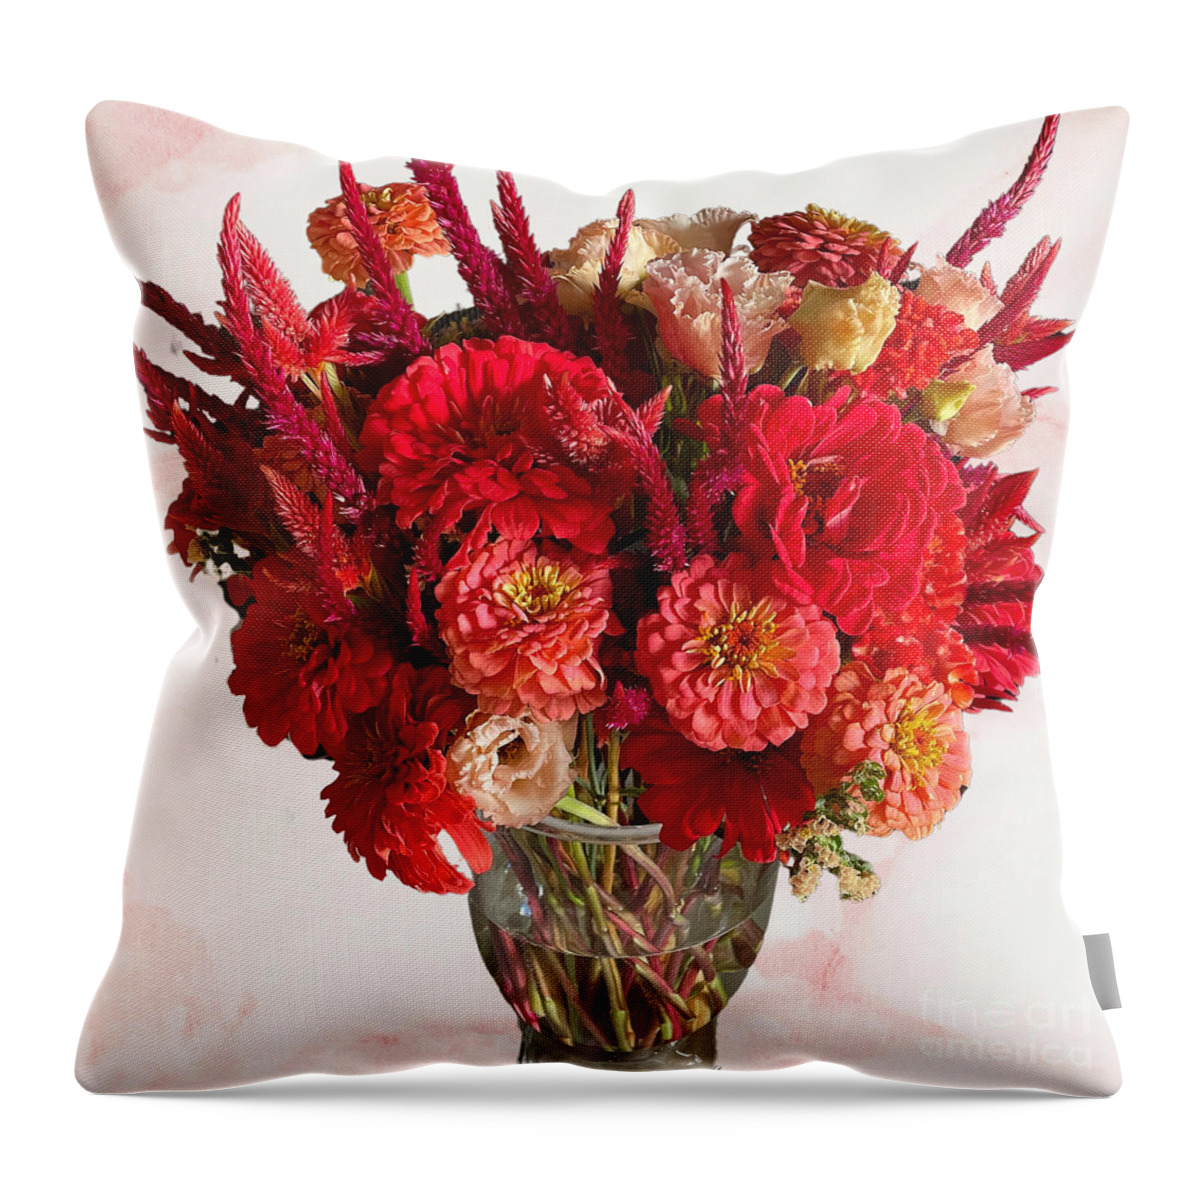 Red Flowers In Vase Throw Pillow featuring the photograph Red Flowers in Vase by Carol Groenen